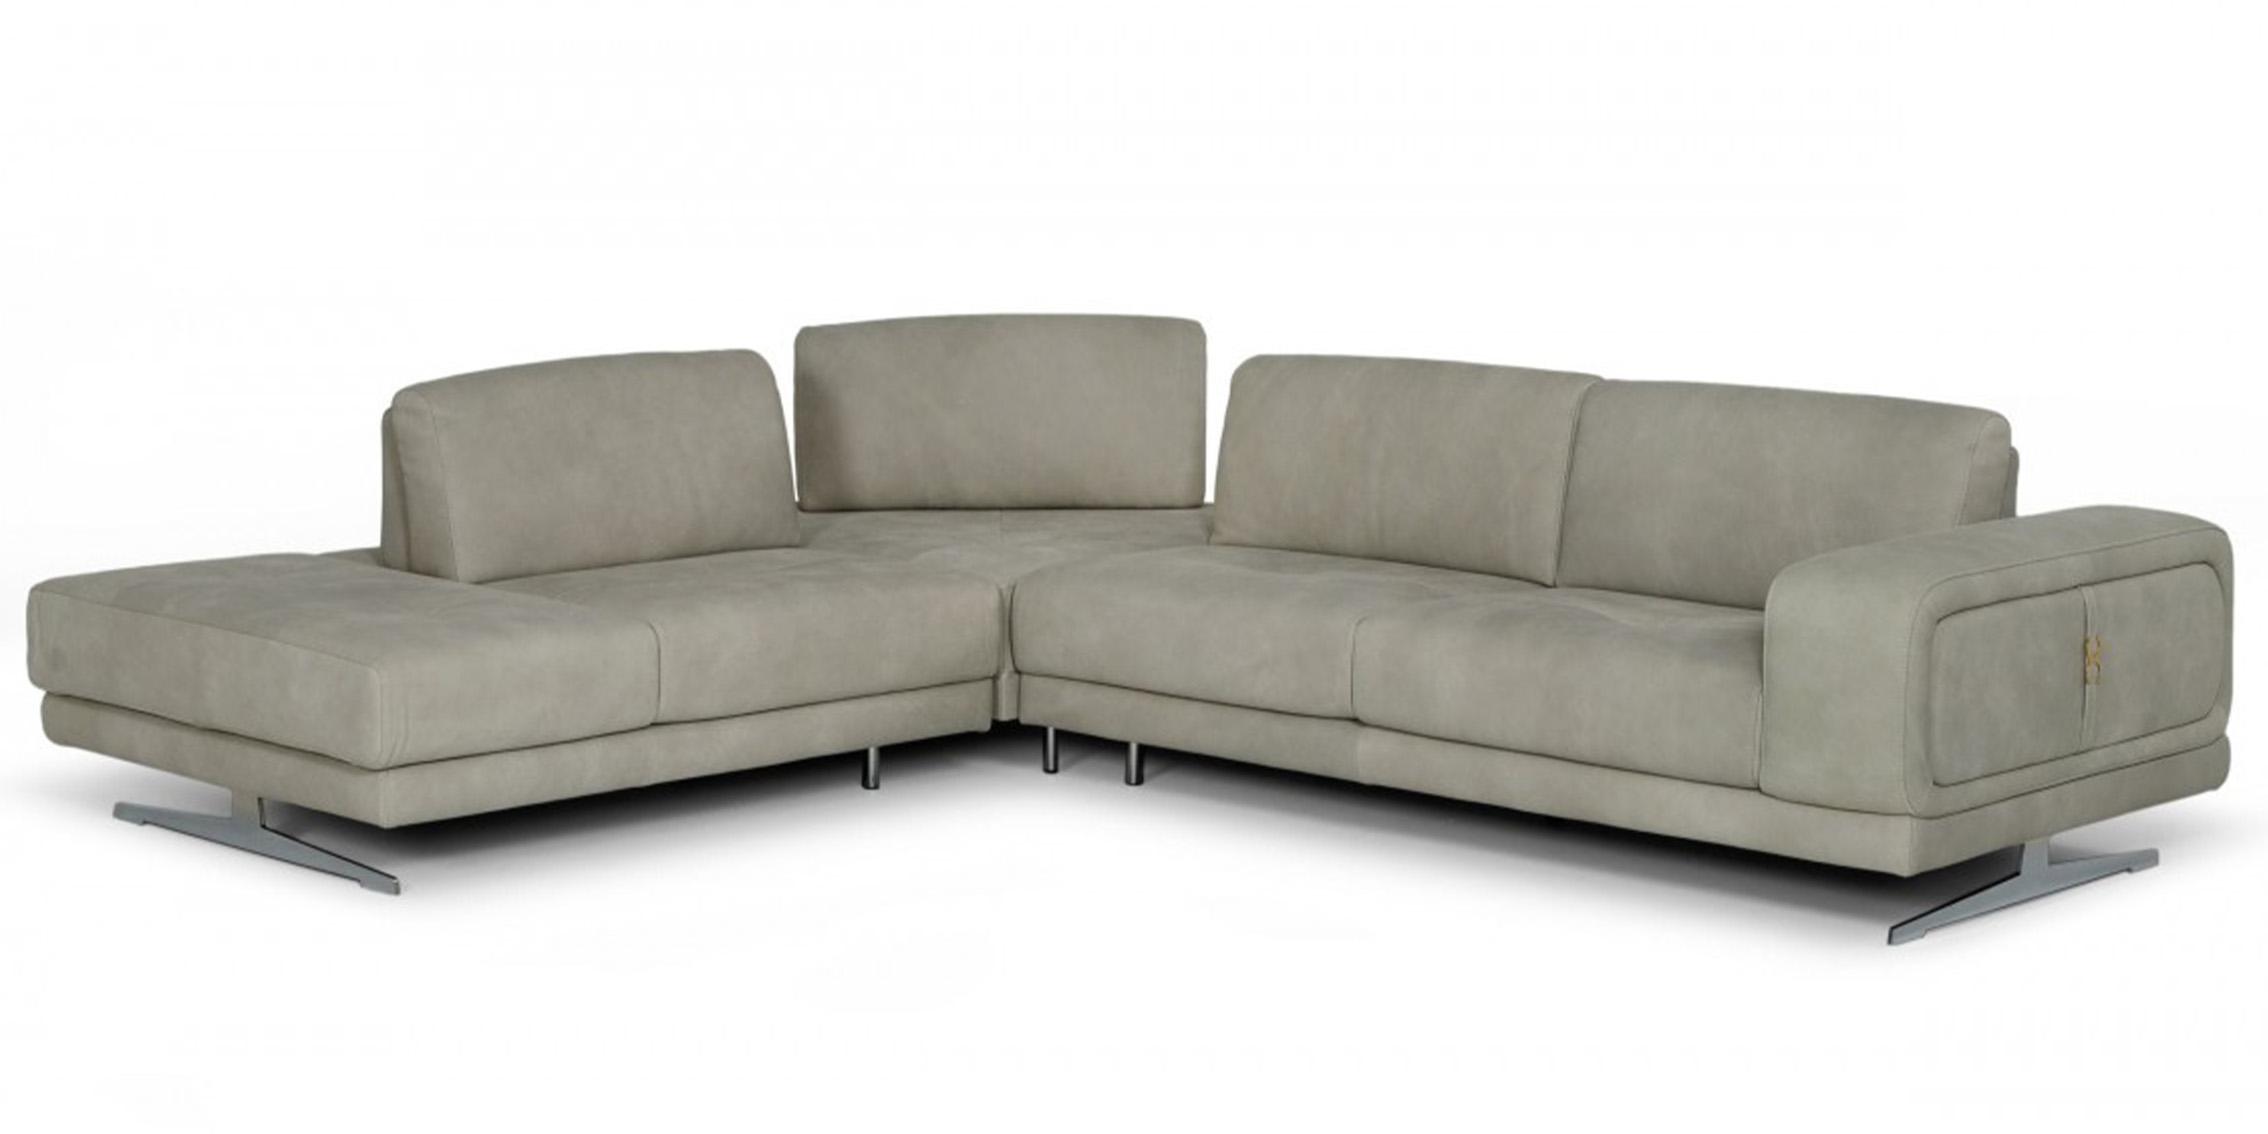 

    
GREY Nubuck Leather Sectional LEFT Coronelli Collezioni Mood VIG Made in Italy
